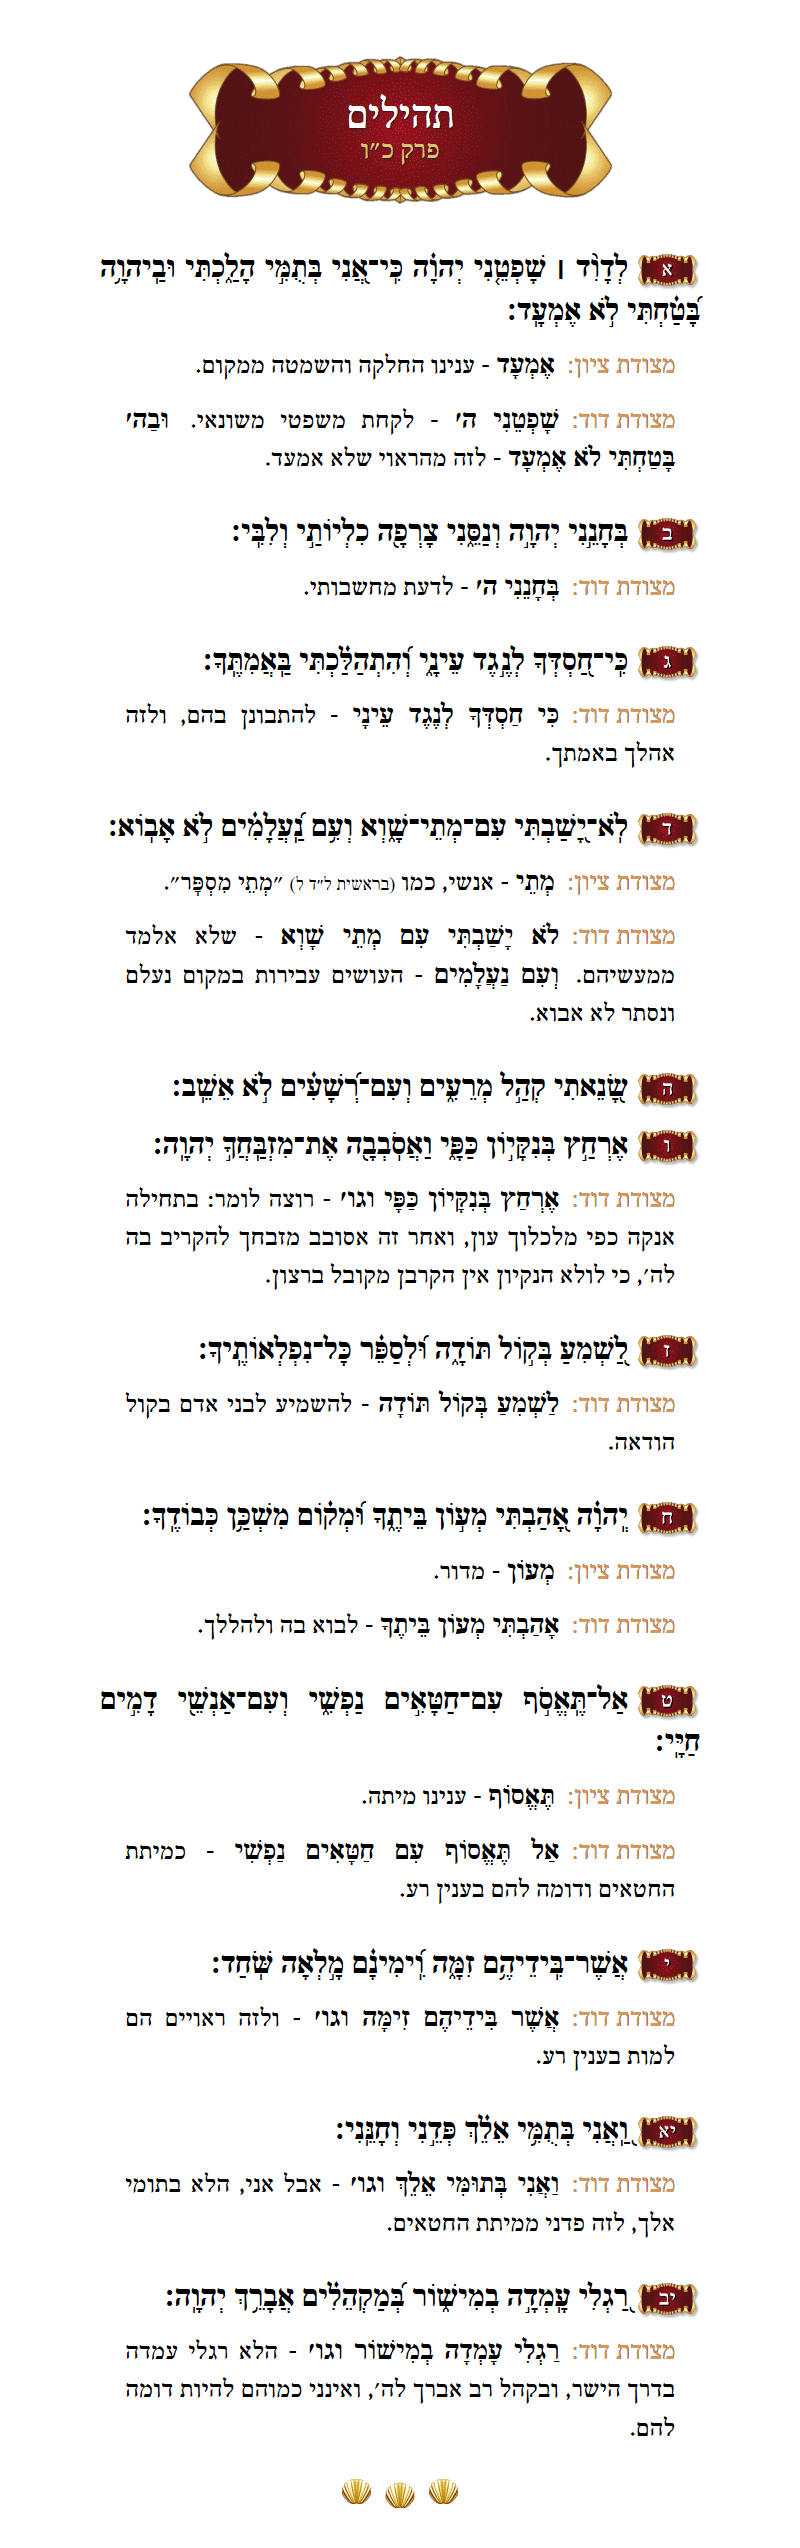 Sefer Tehillim Chapter 26 with commentary